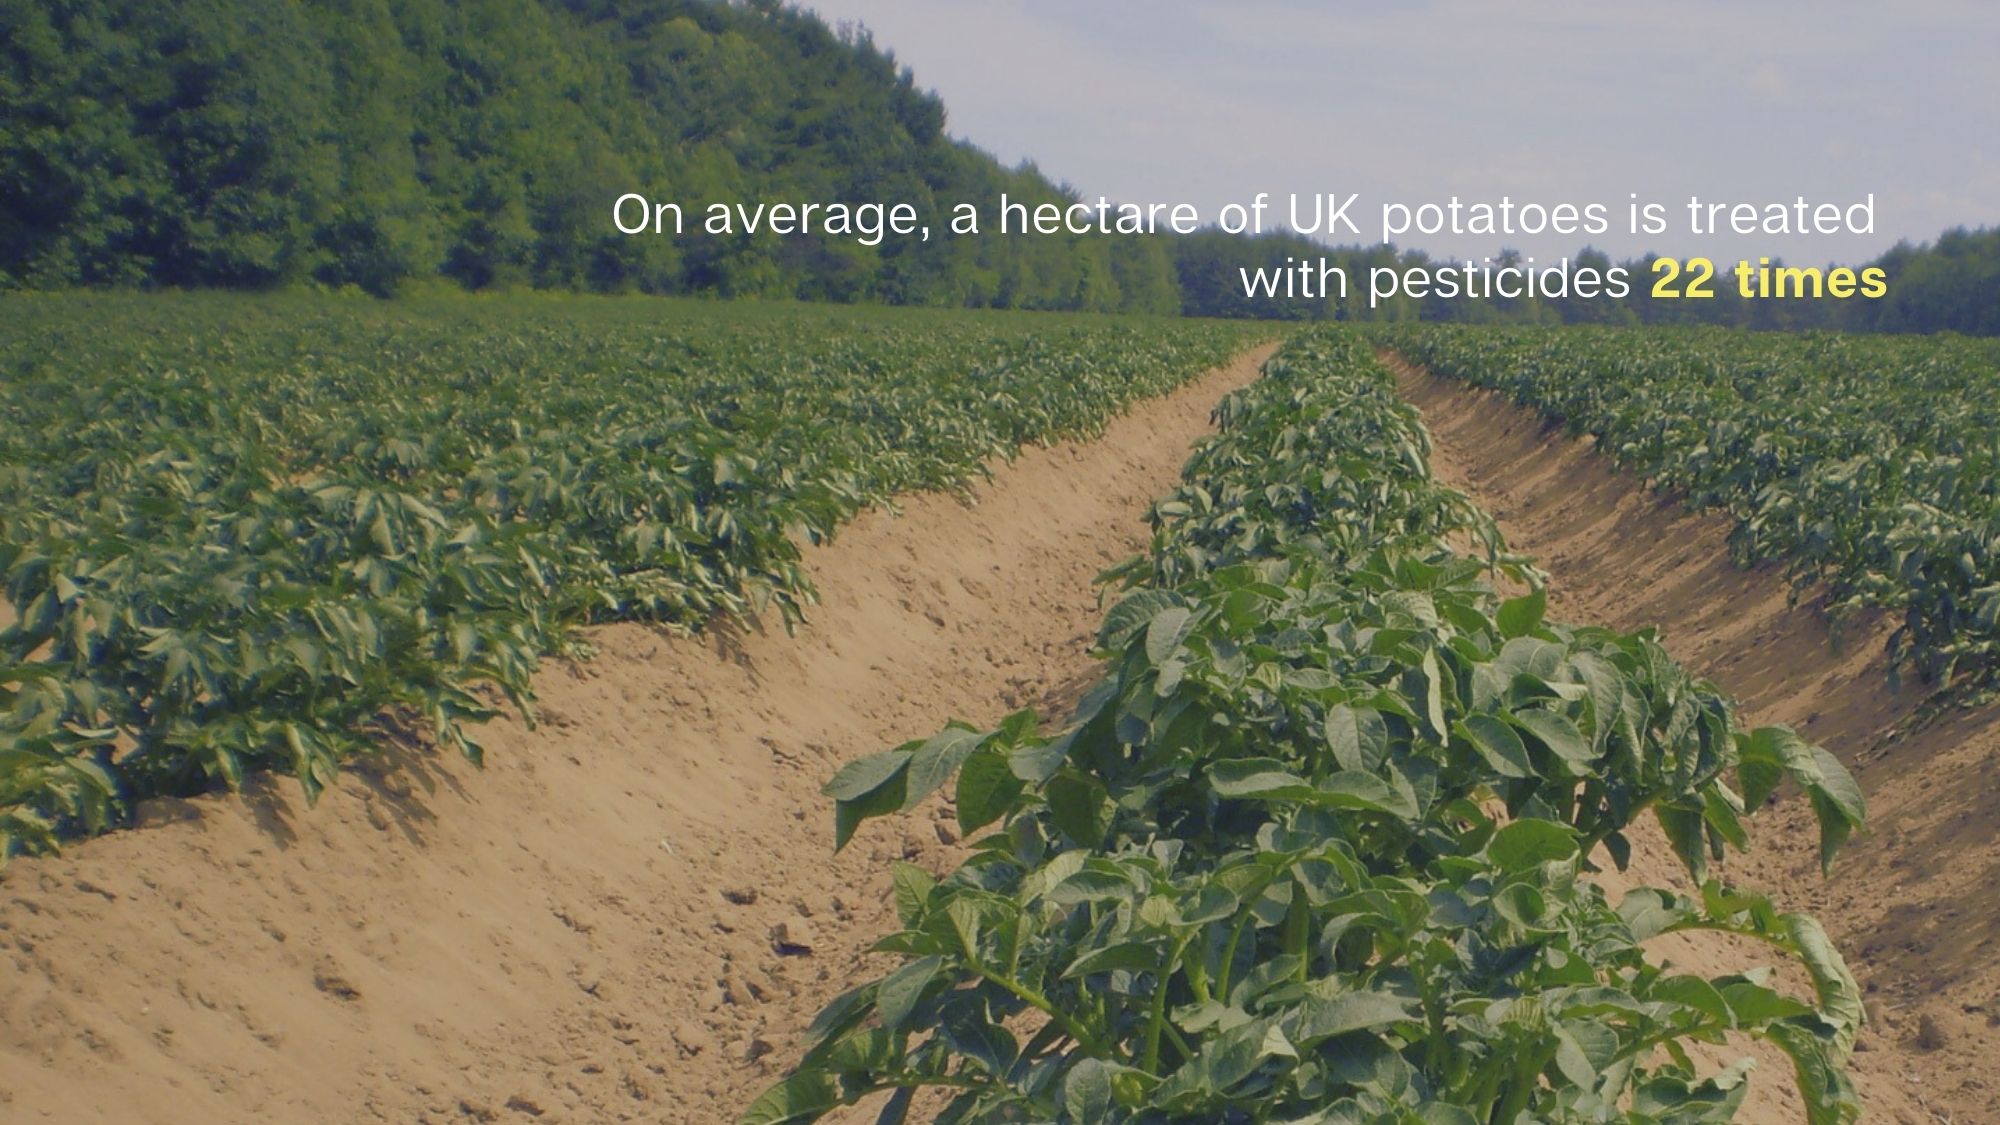 On average, a hectare of UK potatoes is treated with pesticides 22 times